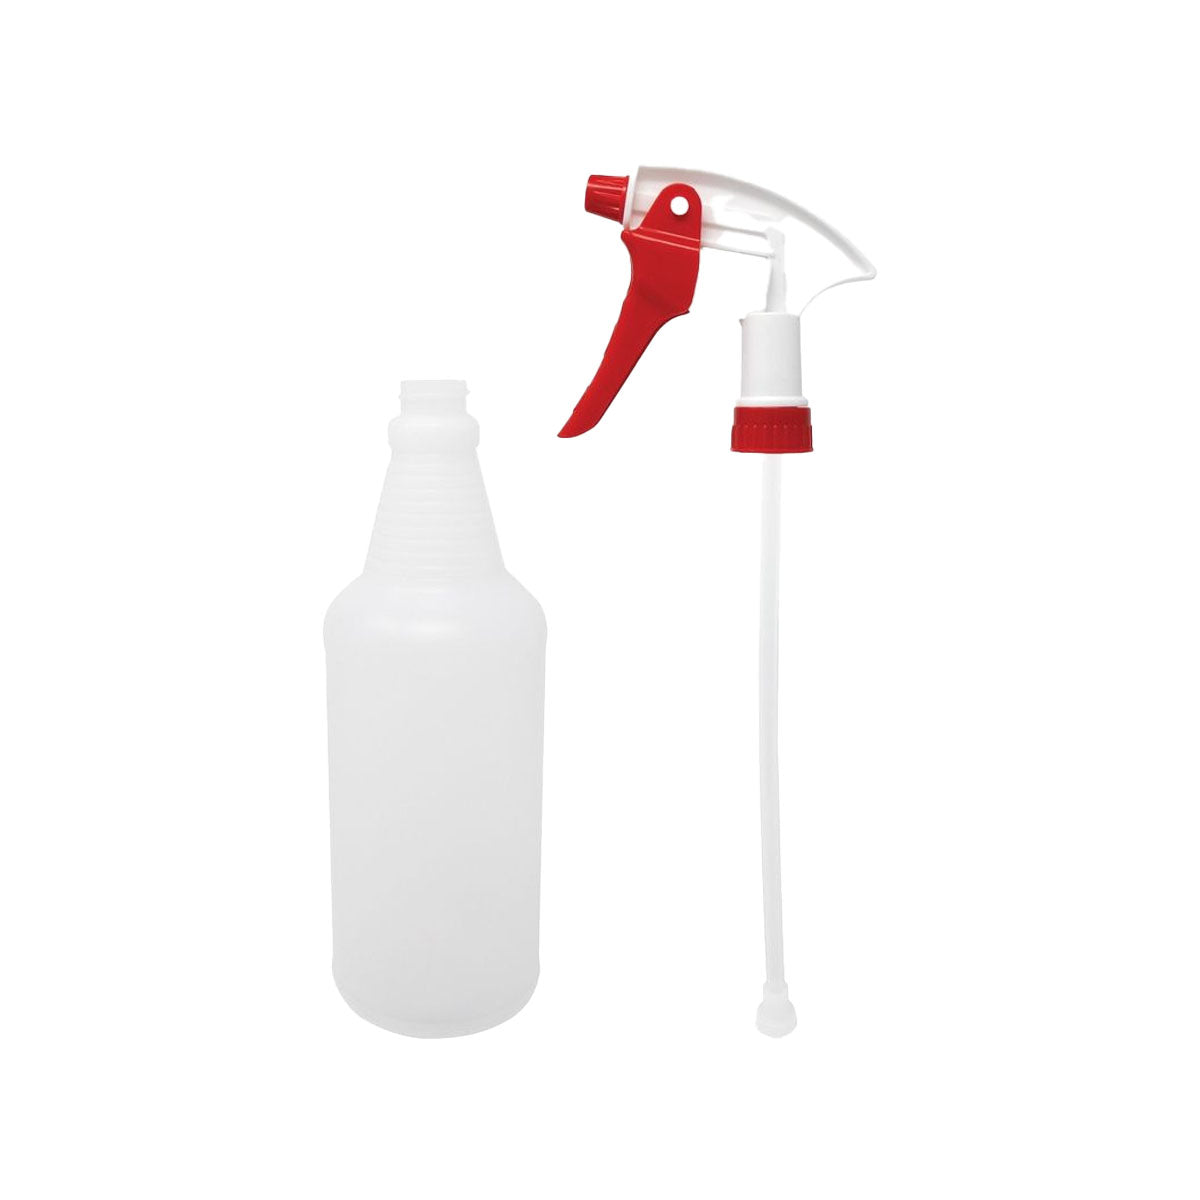 AES Industries 9900 Professional Detailer's Spray Bottle with Large Sprayer | 32 oz